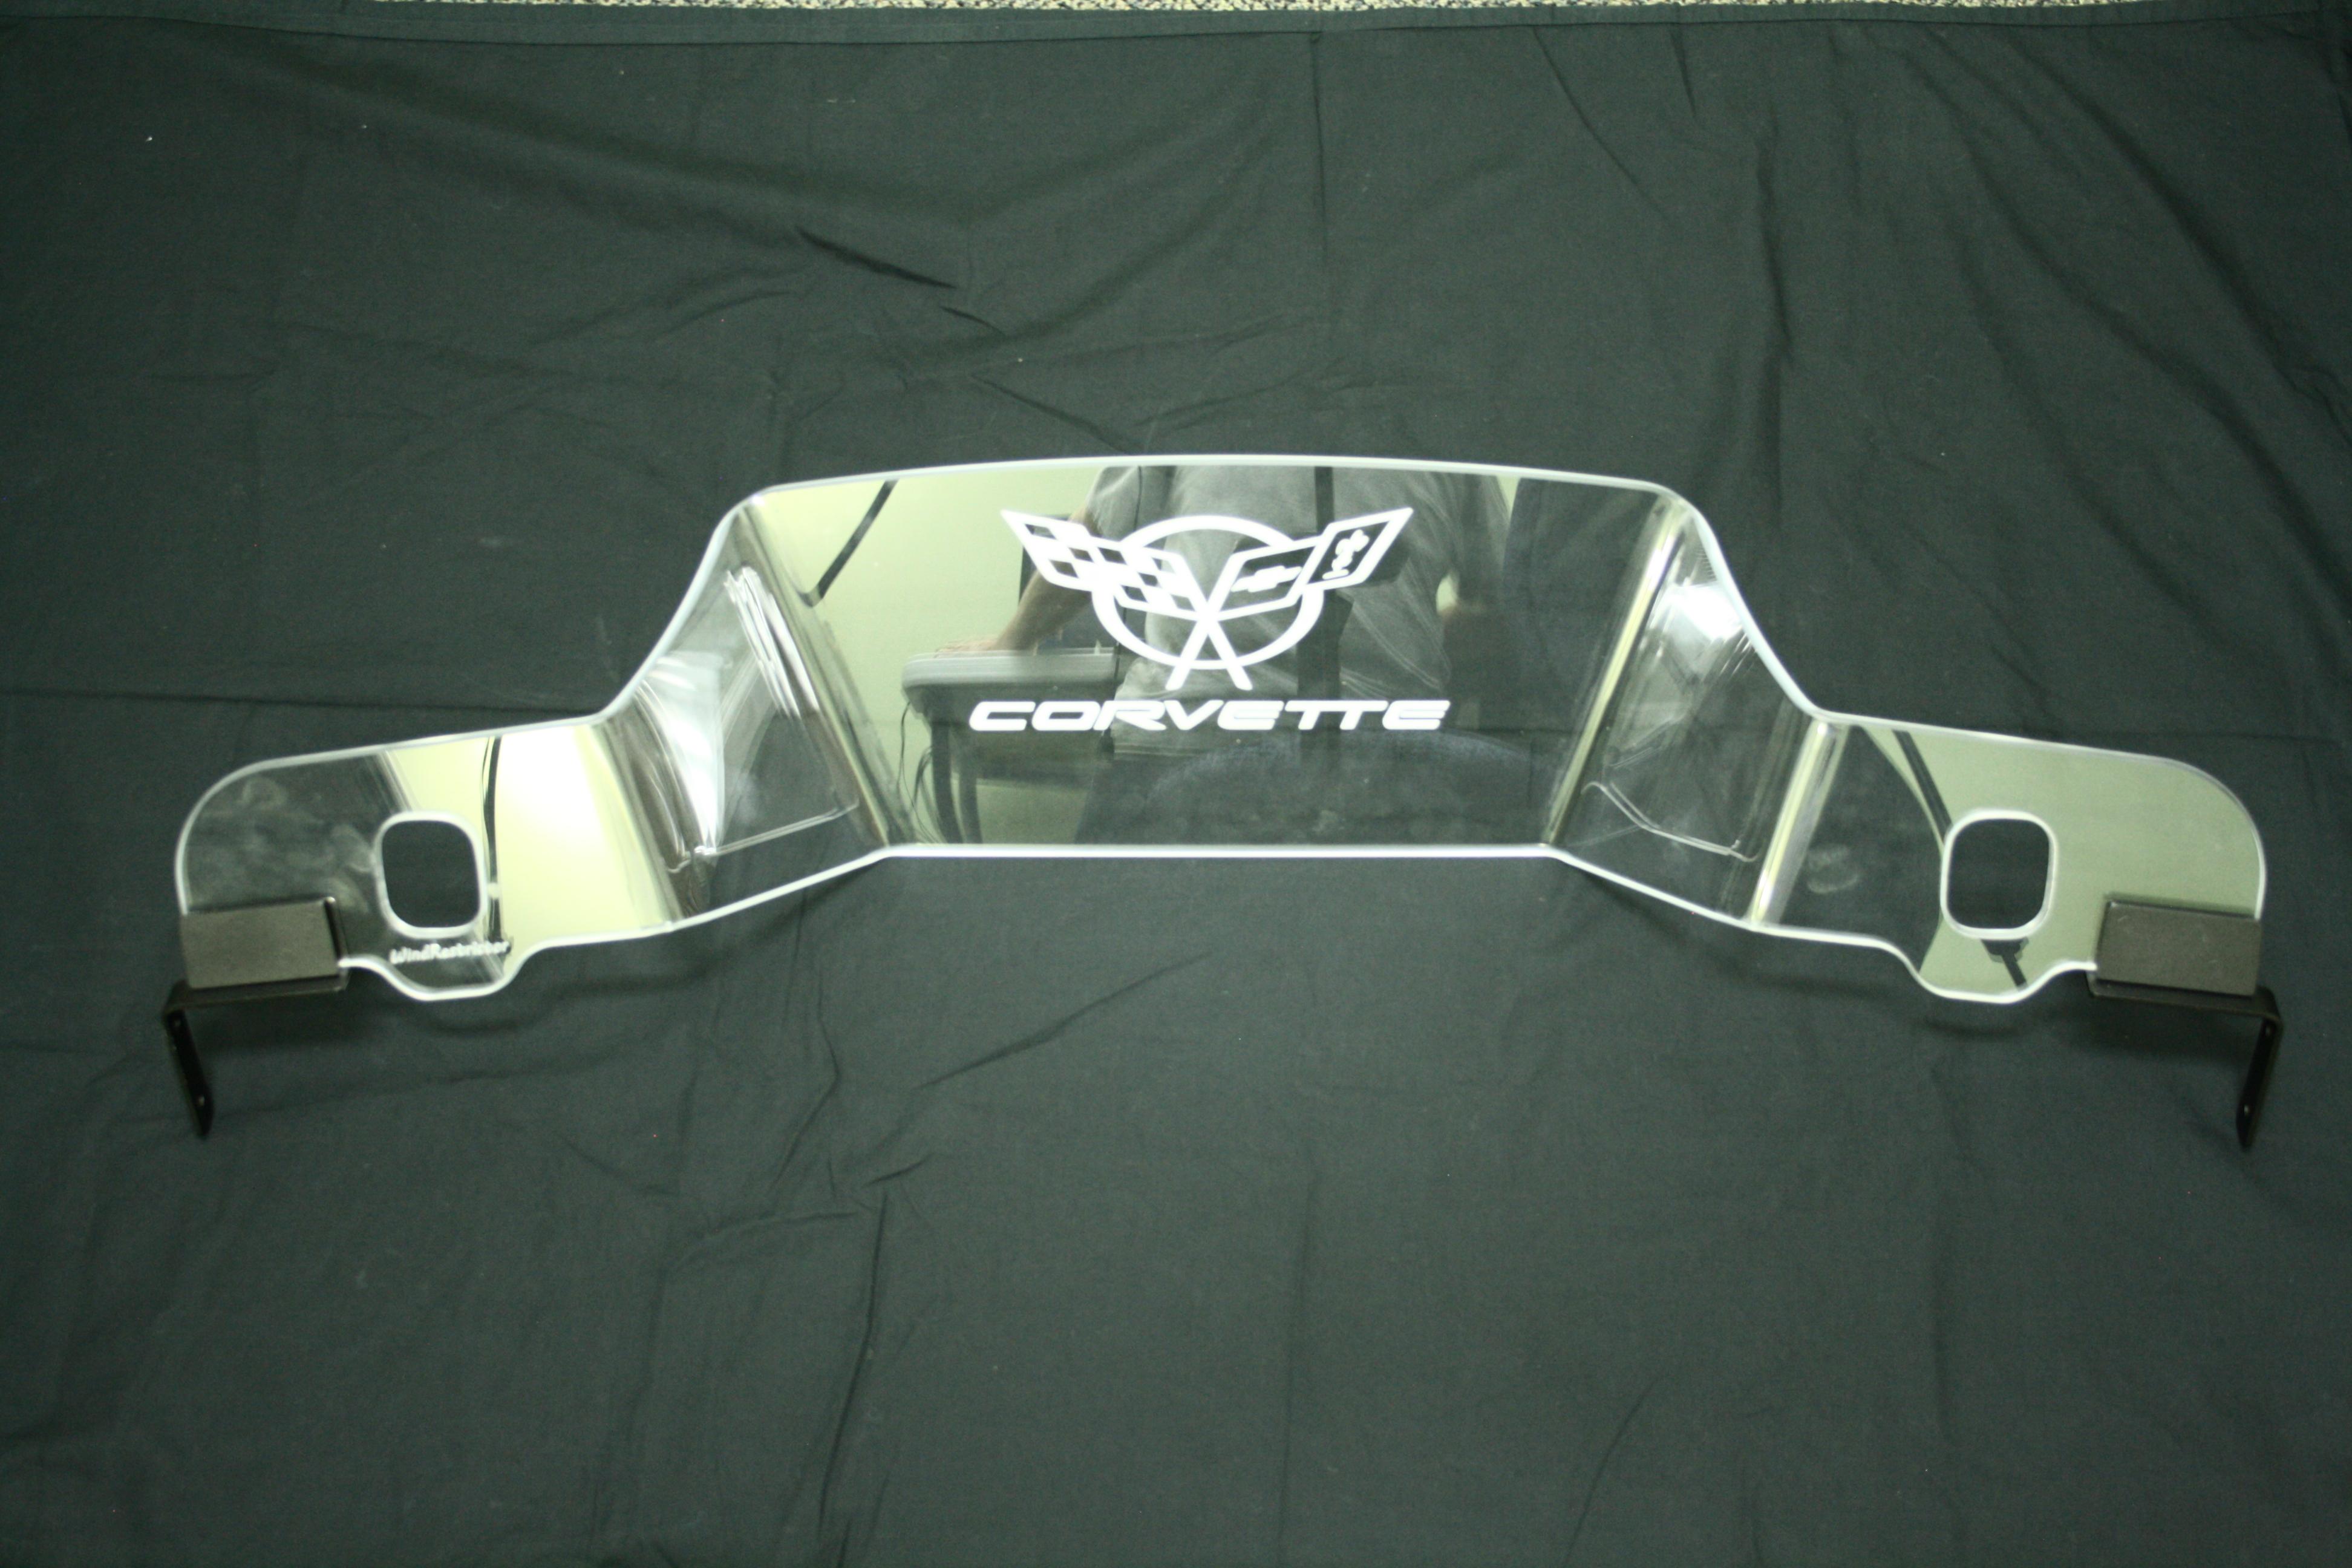 1997-2004 Corvette C5 CONVERTIBLE WINDRESTRICTOR ETCHED WITH EMBLEM AND SCRIPT   97-04